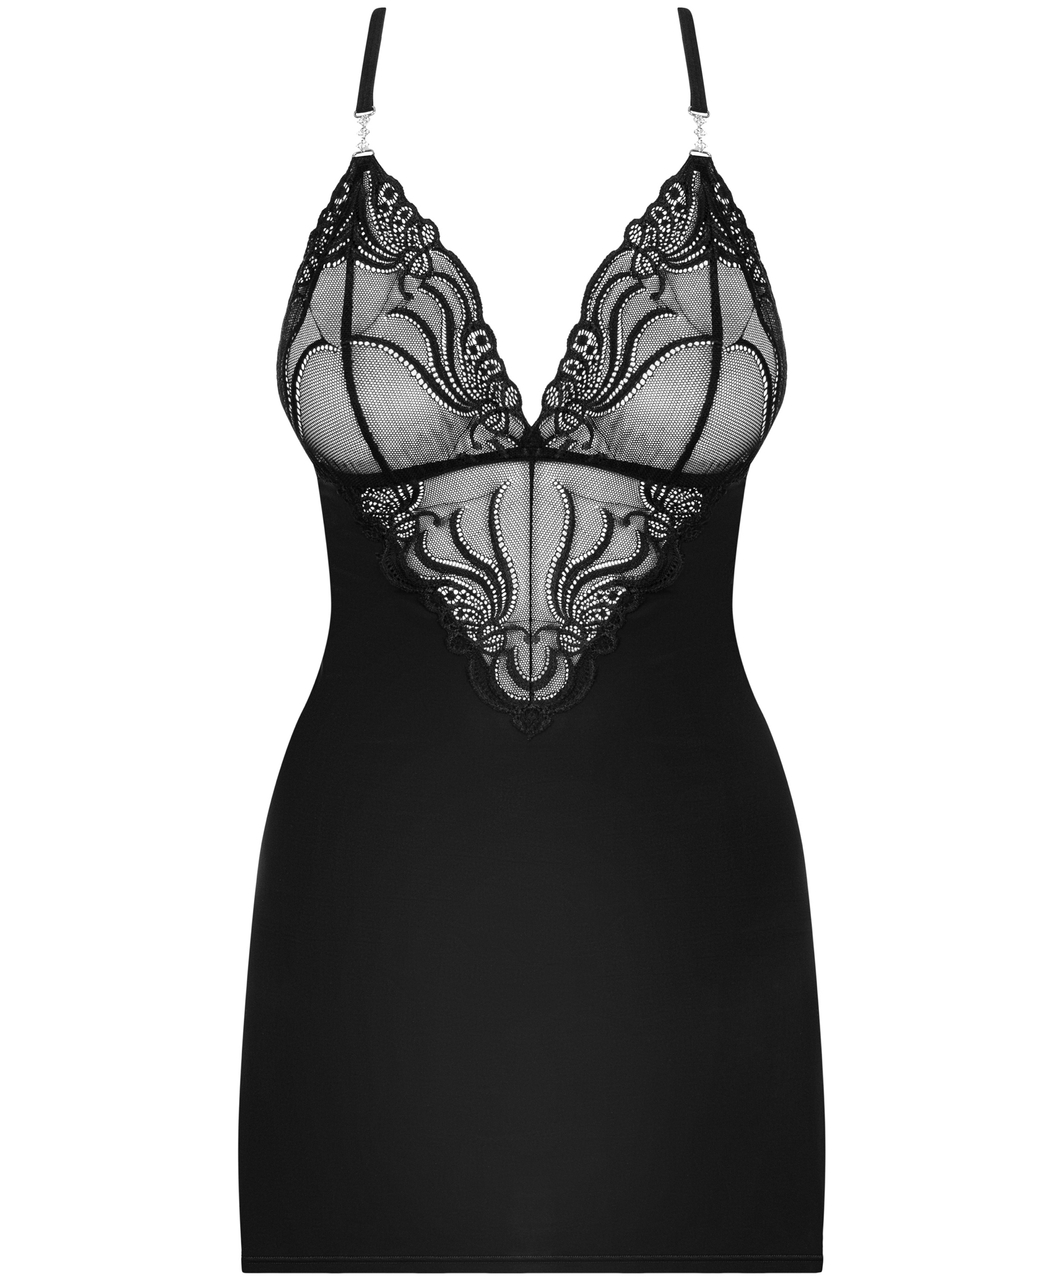 Obsessive black chemise with straps and lace